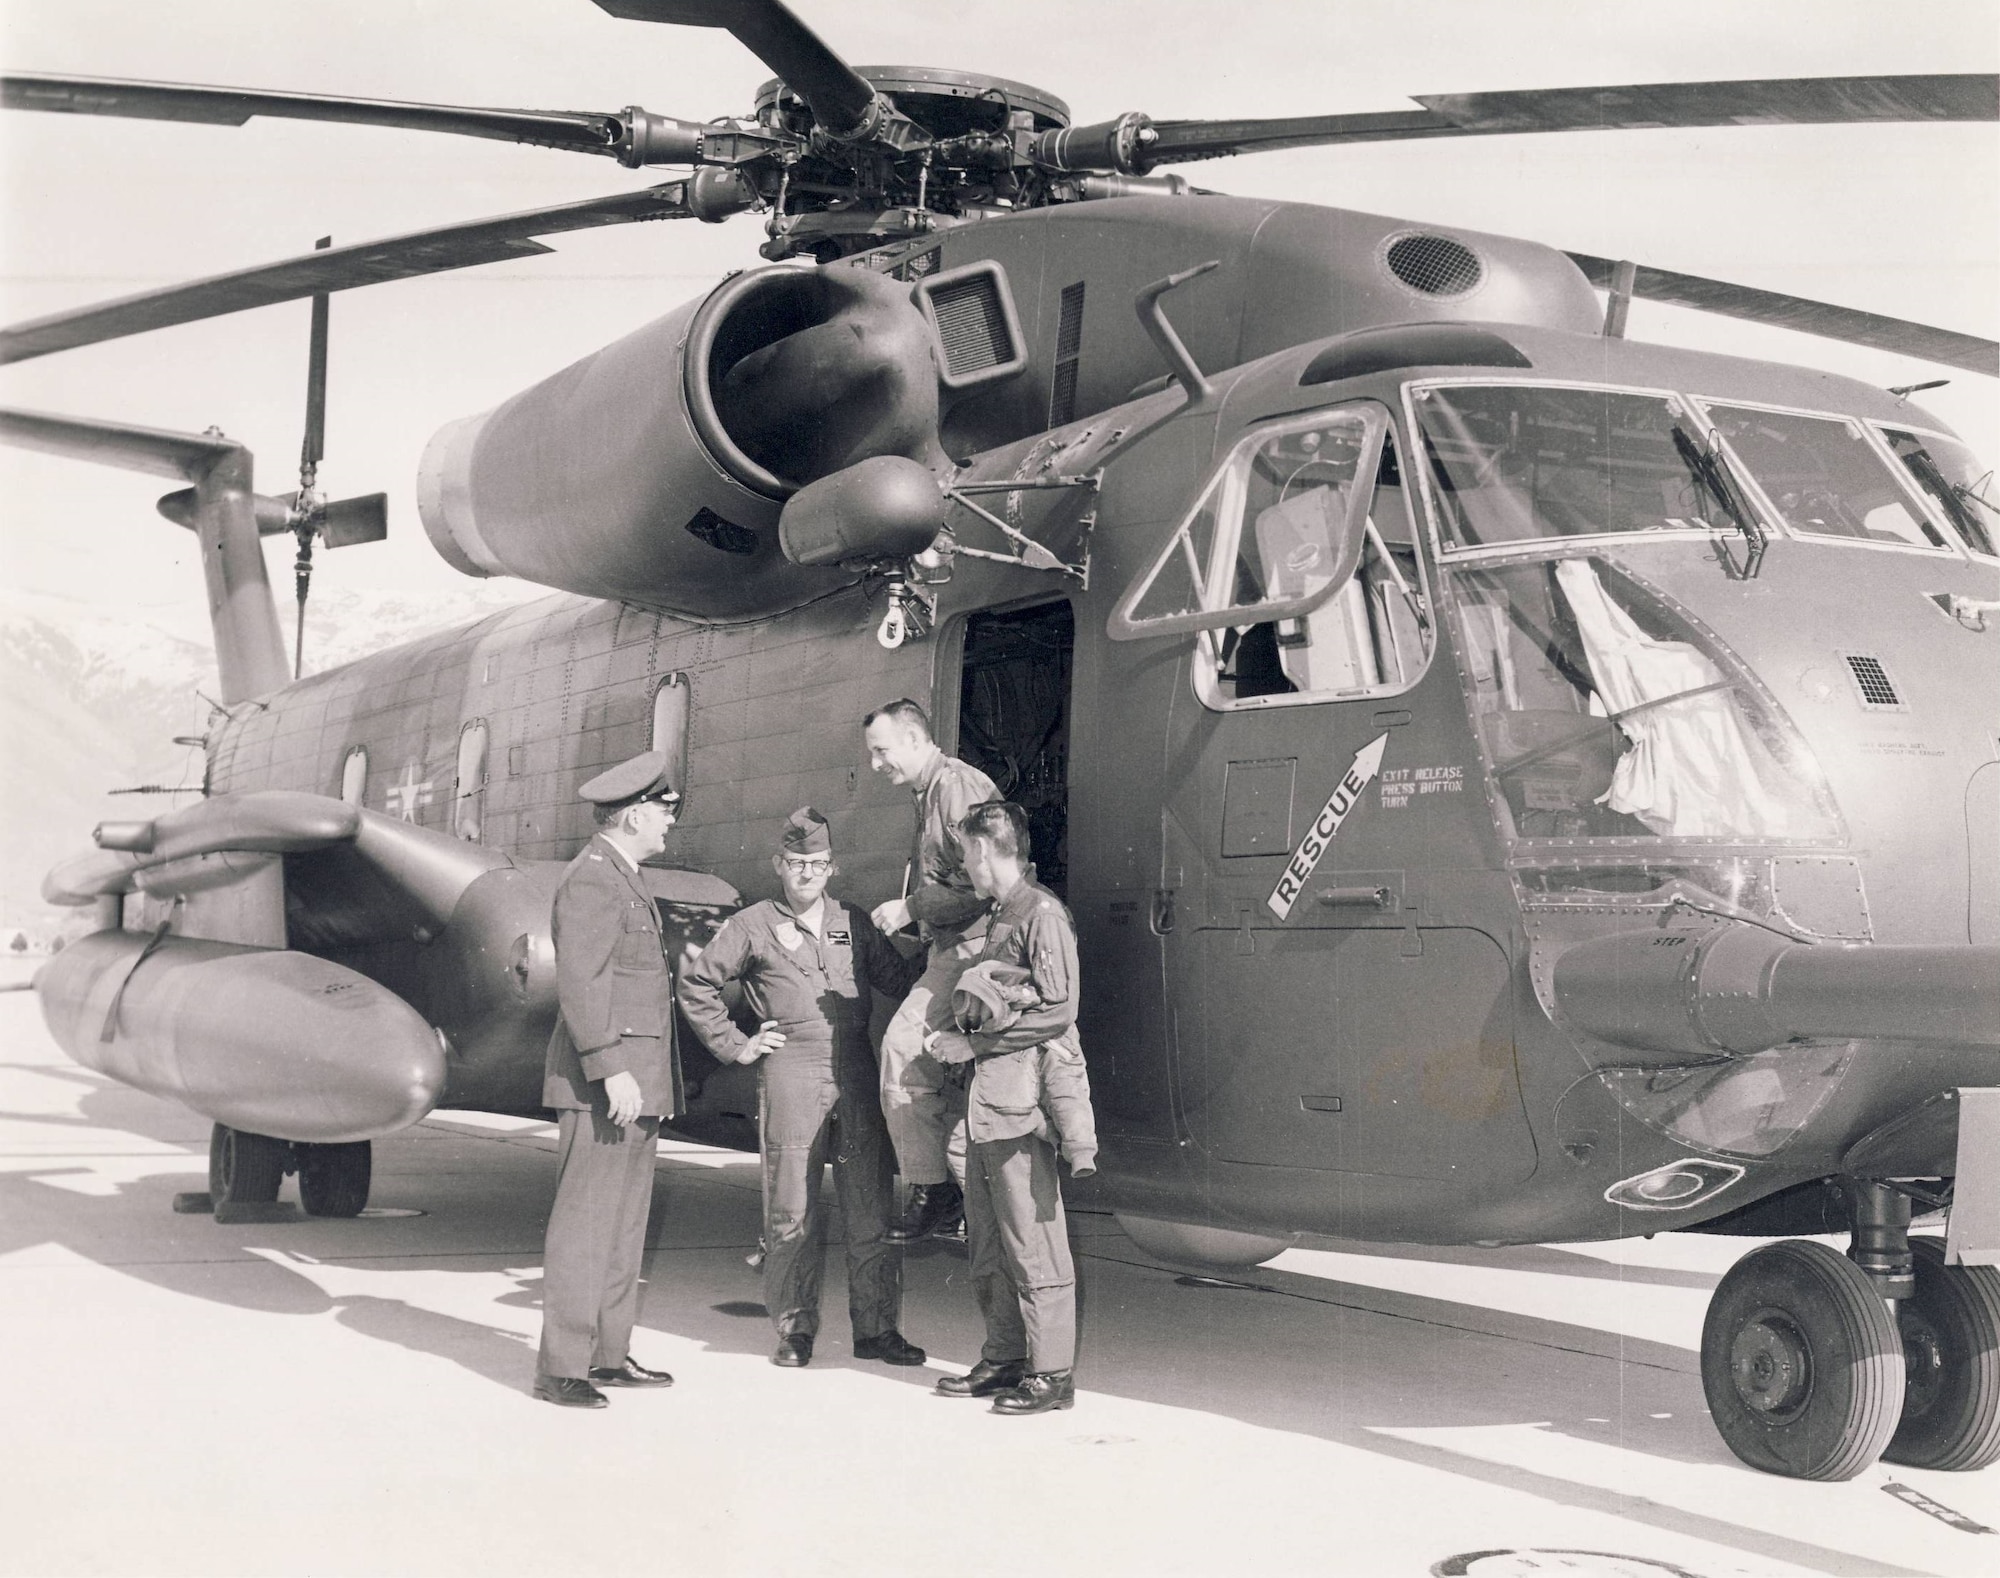 The 1550th Aircrew Training and Test Wing trained pilots to fly the Sikorsky HH-53C Super Jolly helicopter at Hill AFB from 1973 until the unit relocated to Kirtland AFB, New Mexico, in 1976.